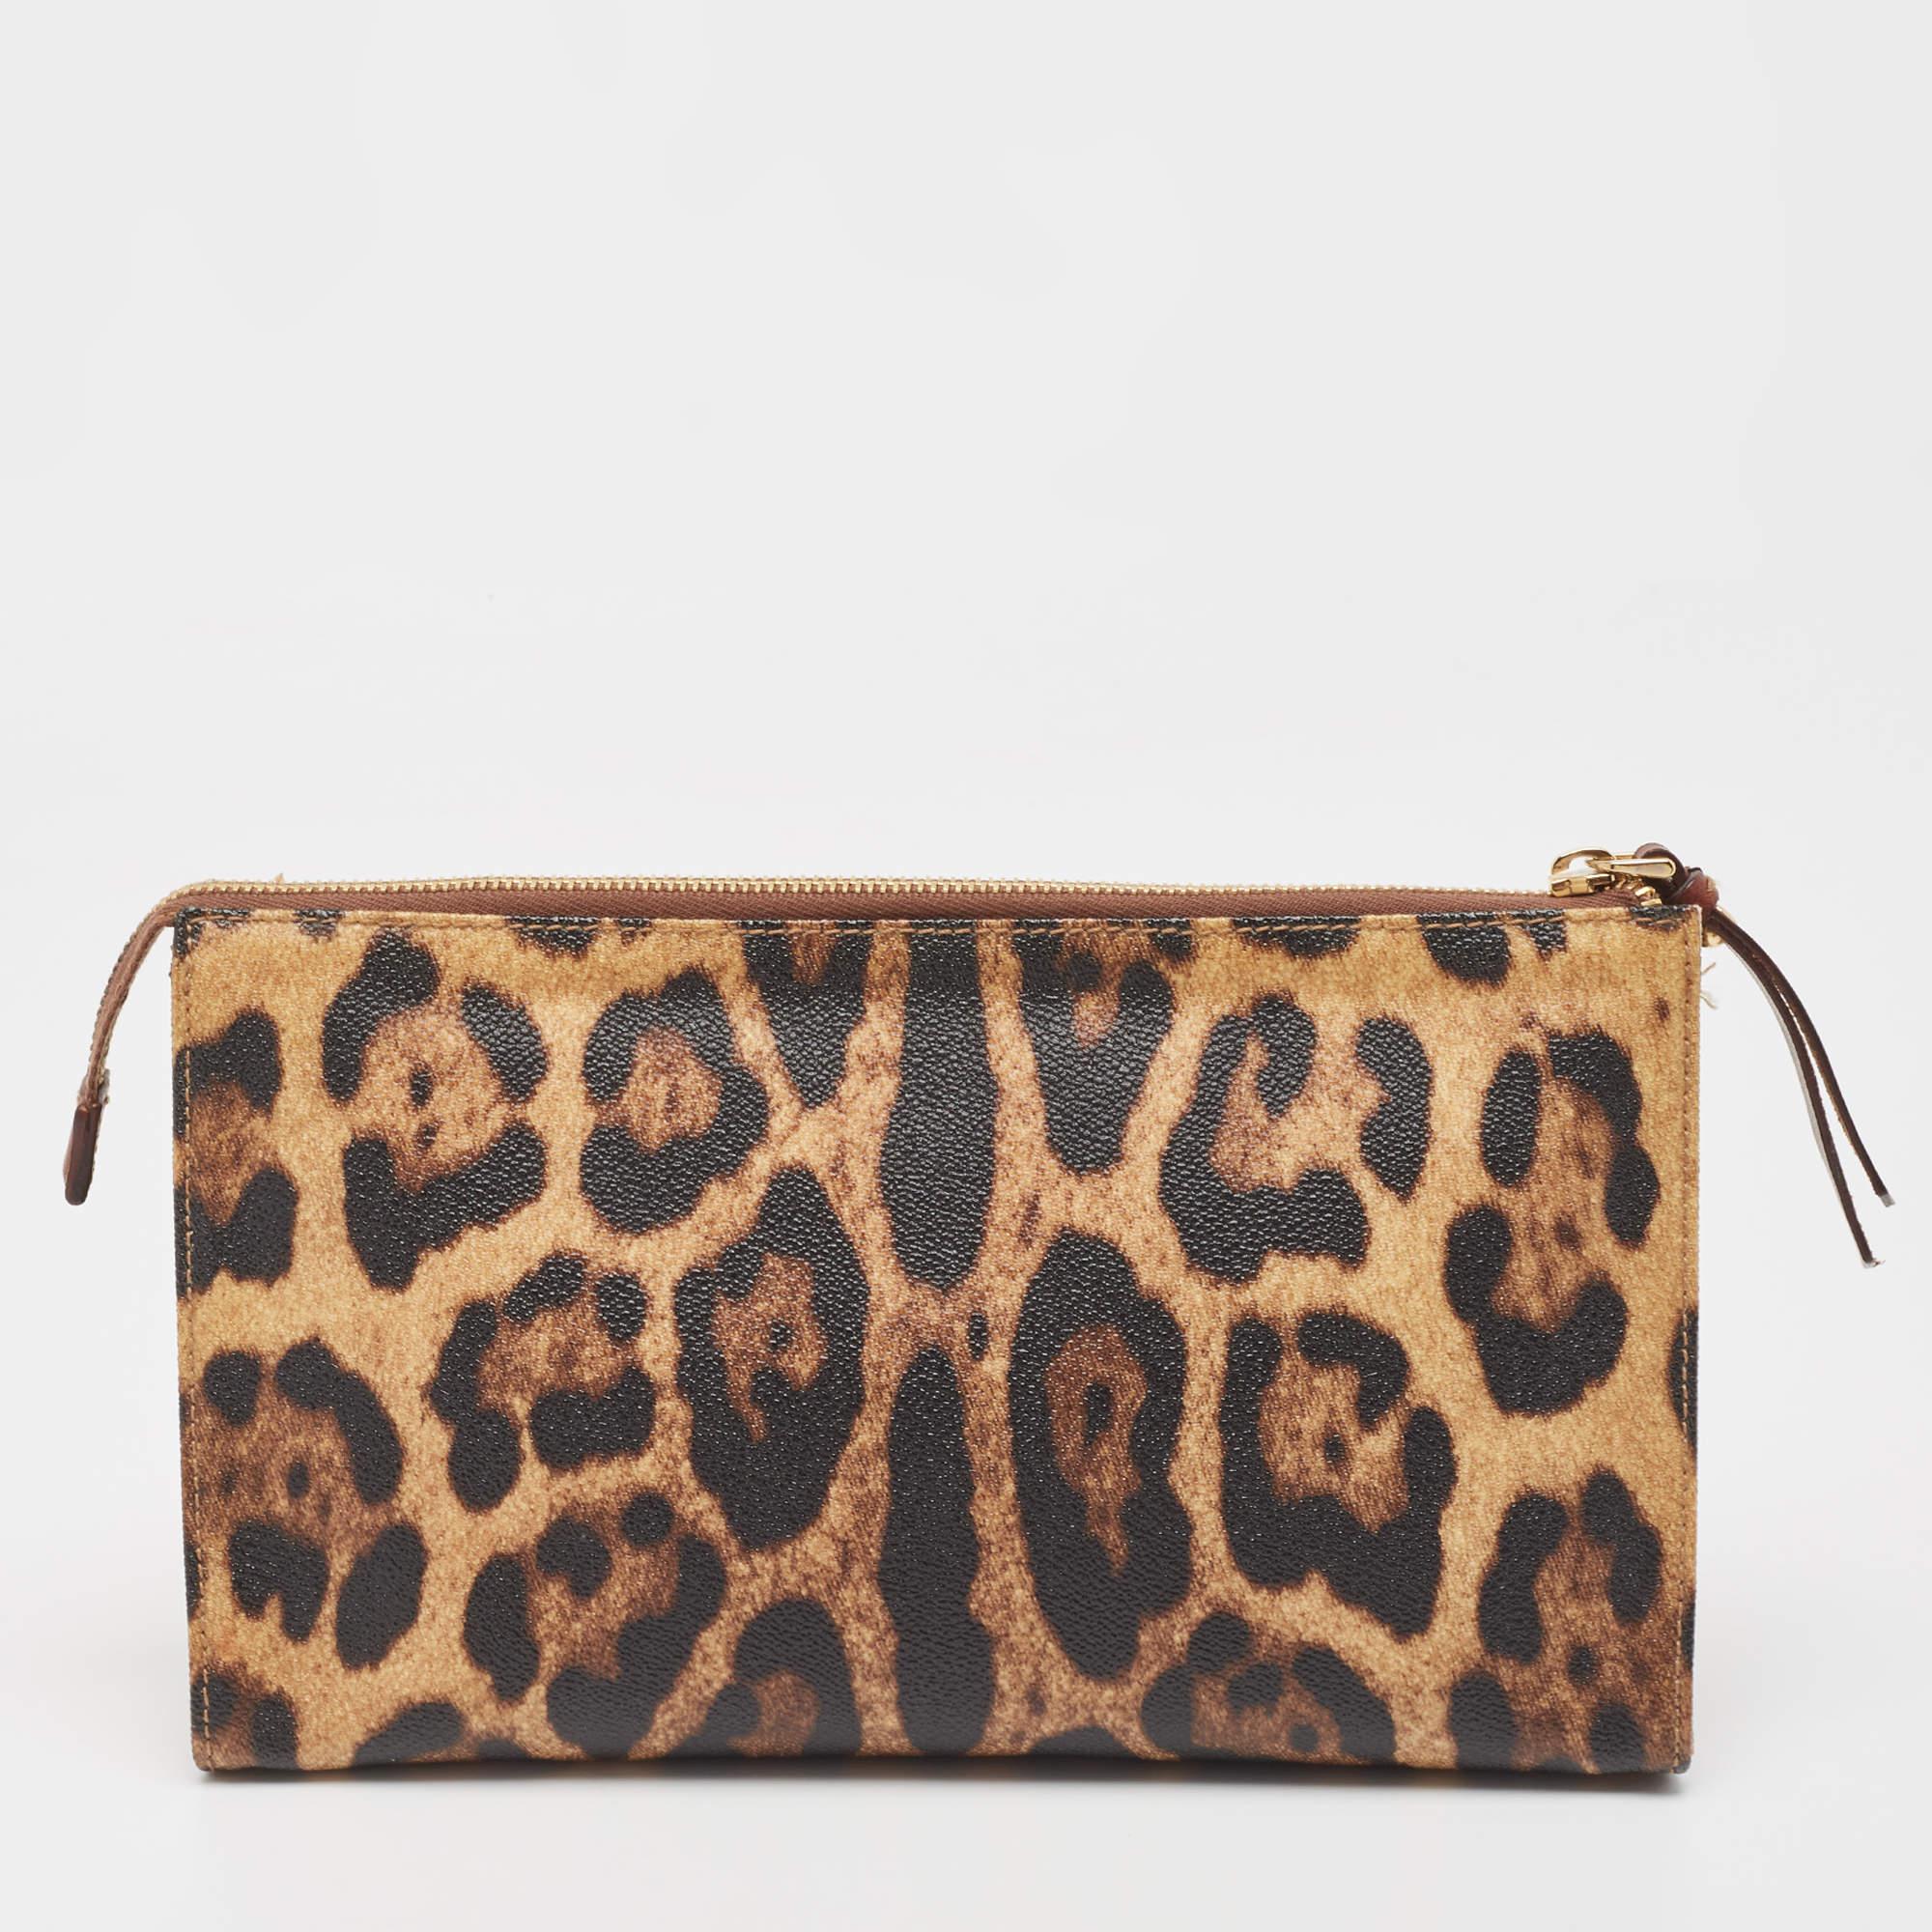 The Dolce & Gabbana case is a luxurious and stylish accessory. It features a beige and black leopard print pattern on coated canvas, with a zip closure, and a spacious interior for storing cosmetics or essentials. It exudes a bold and sophisticated